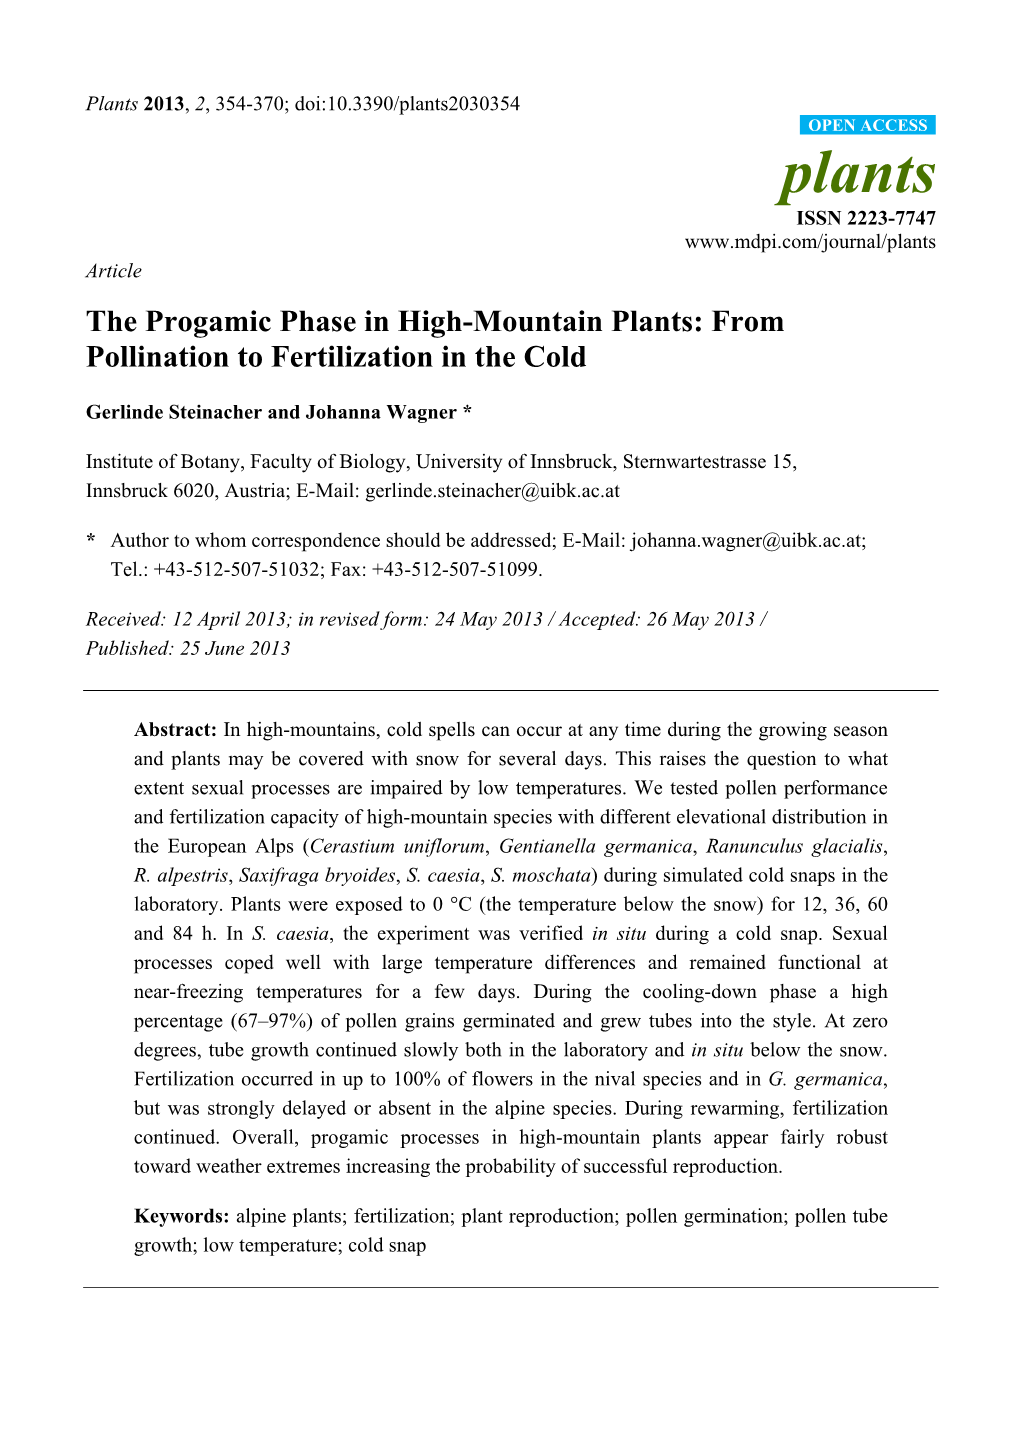 The Progamic Phase in High-Mountain Plants: from Pollination to Fertilization in the Cold